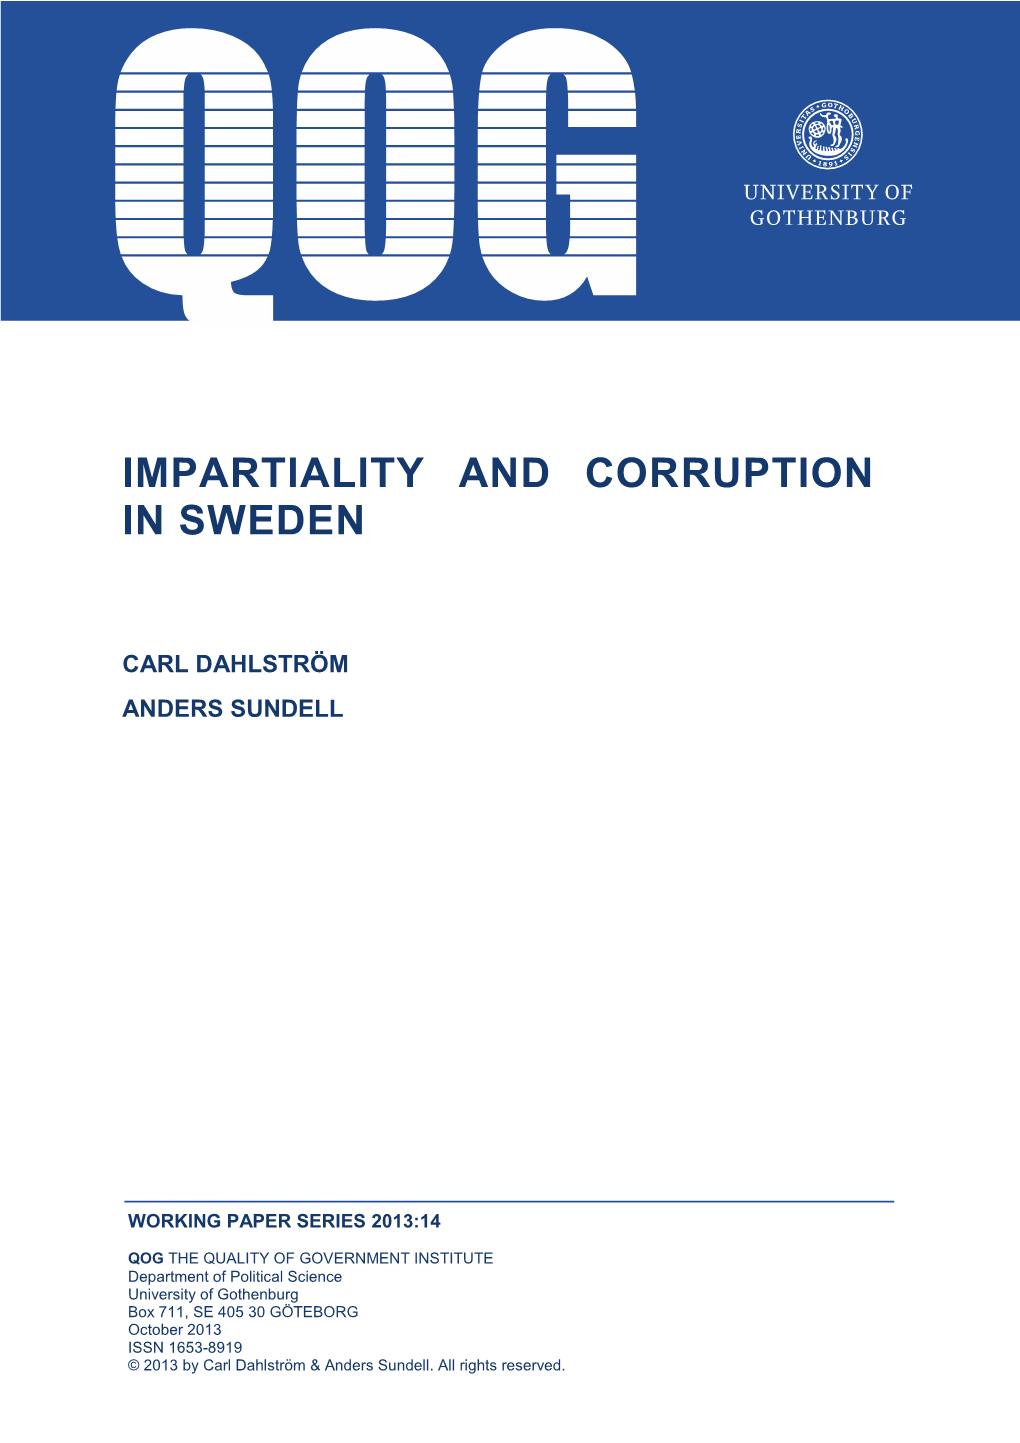 Impartiality and Corruption in Sweden